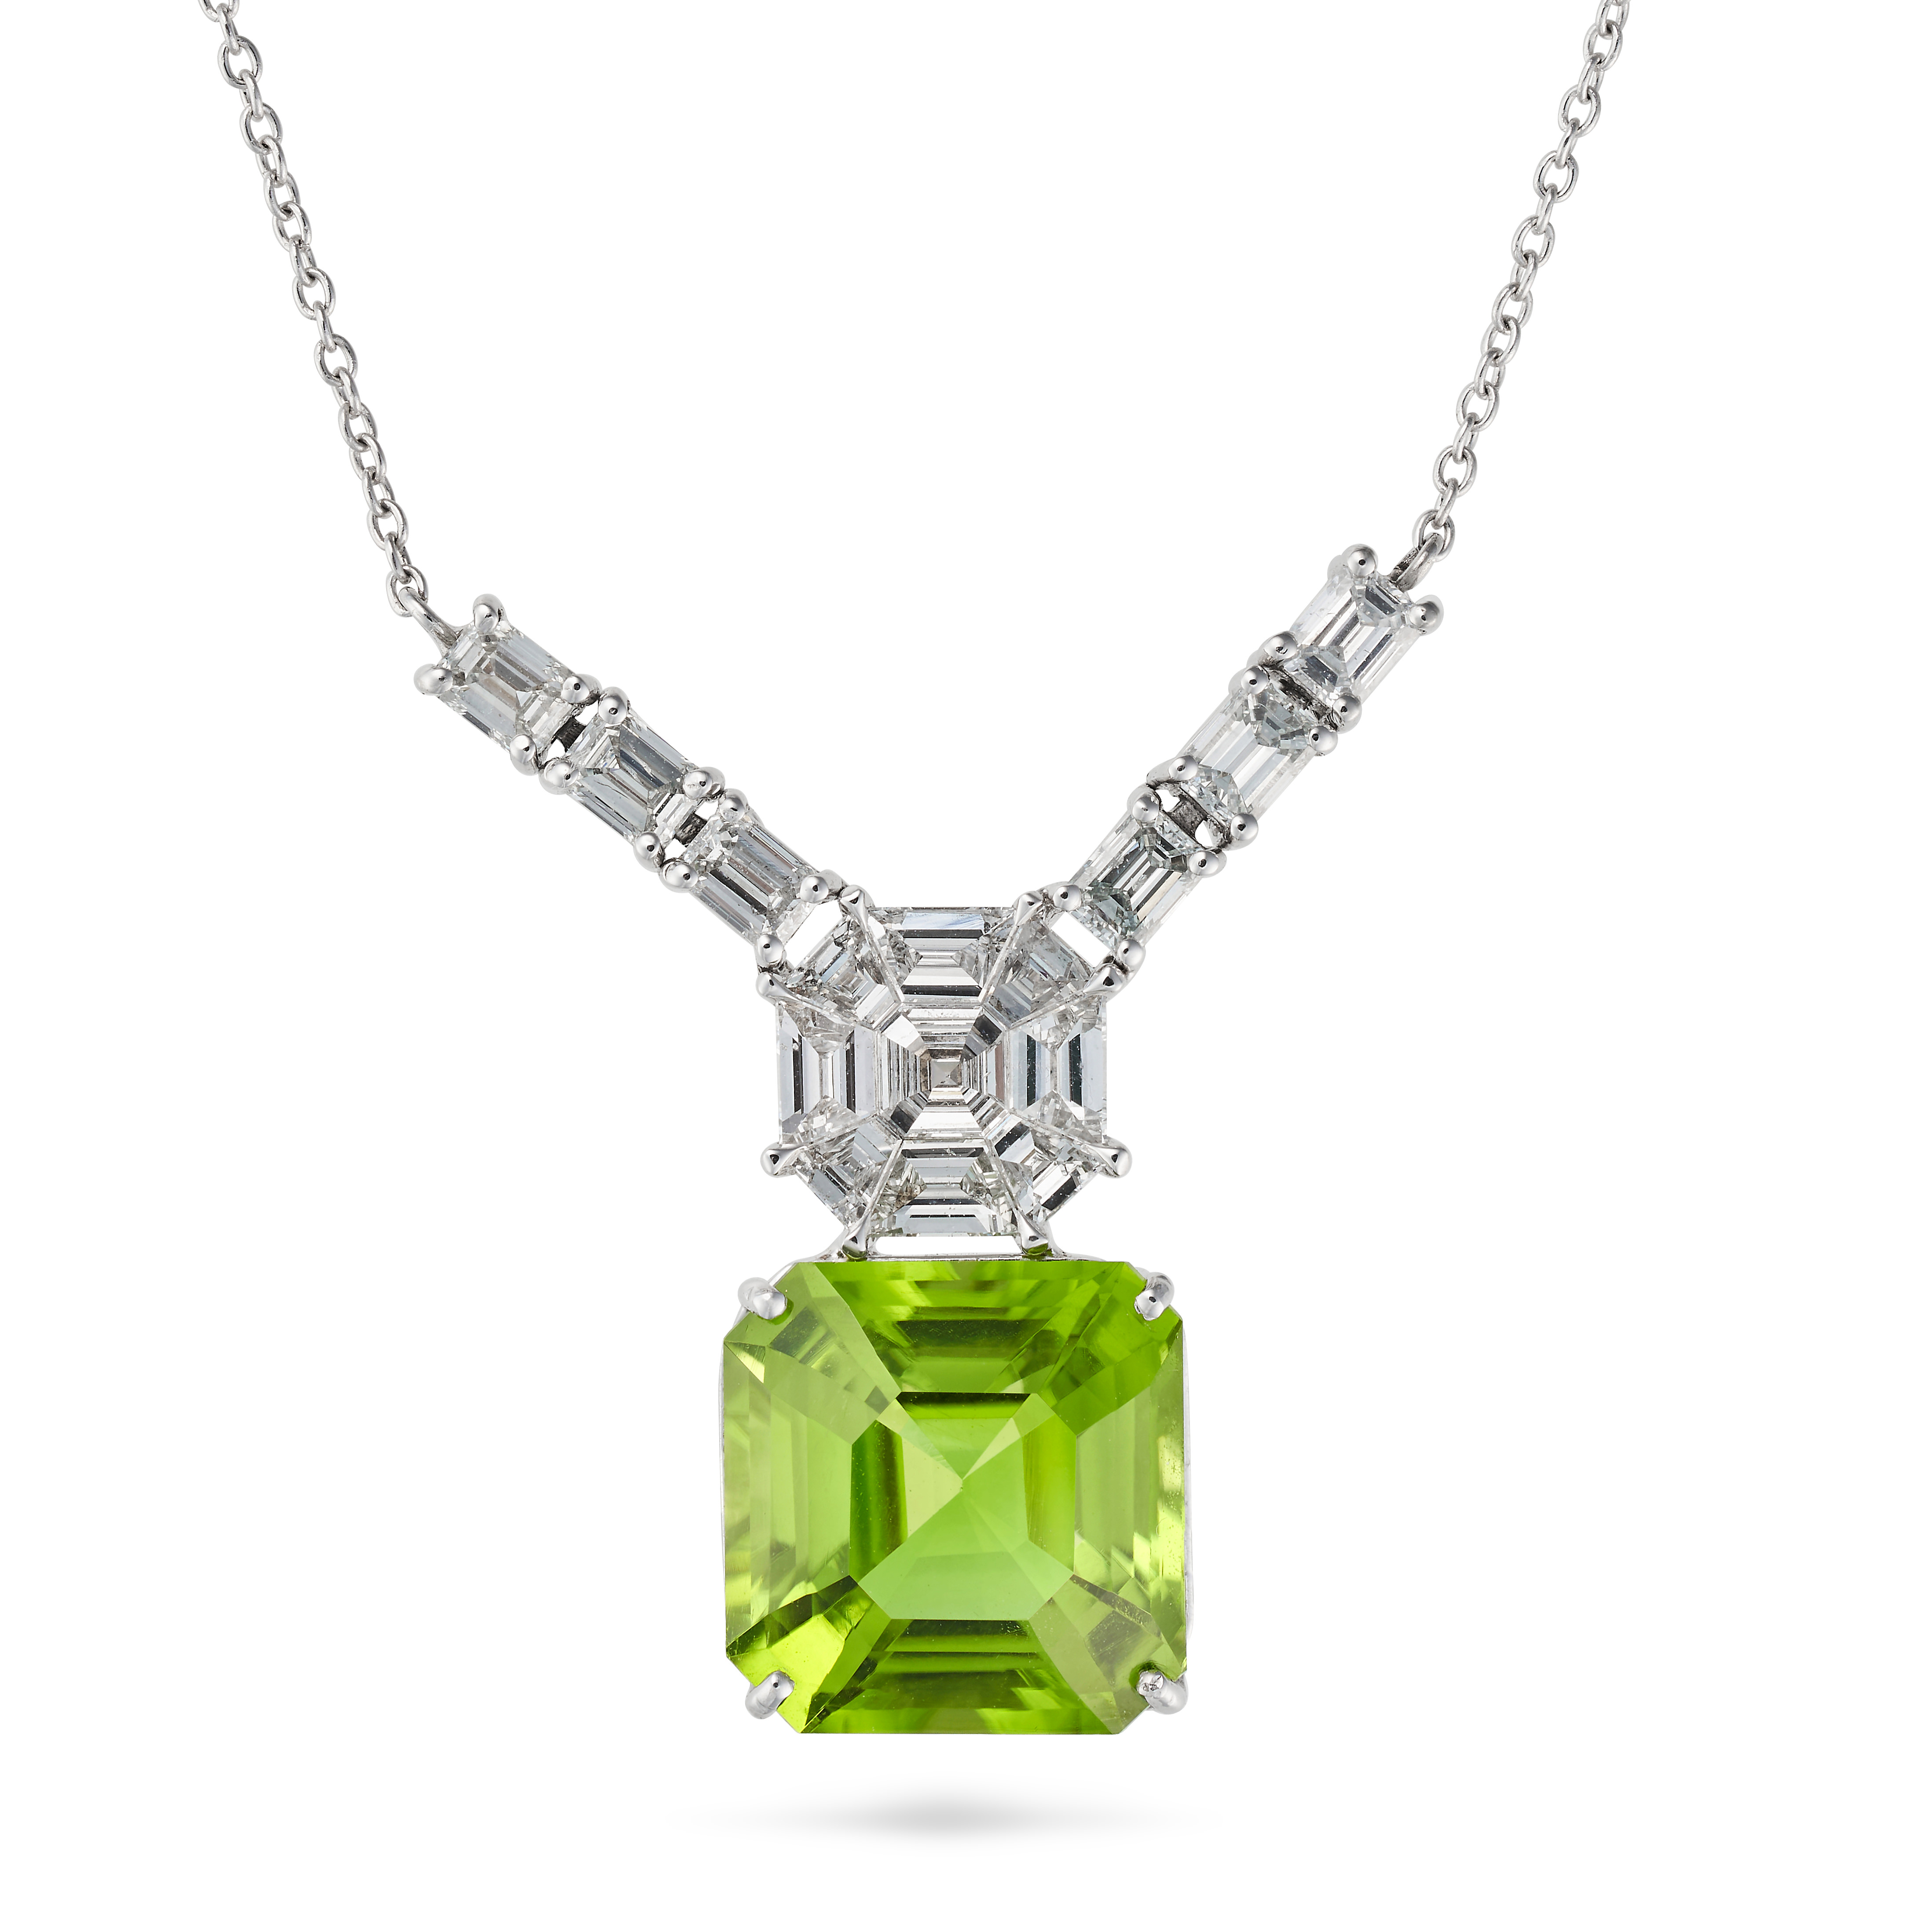 A PERIDOT AND DIAMOND PENDANT NECKLACE the pendant comprising an illusion set cluster of octagona...